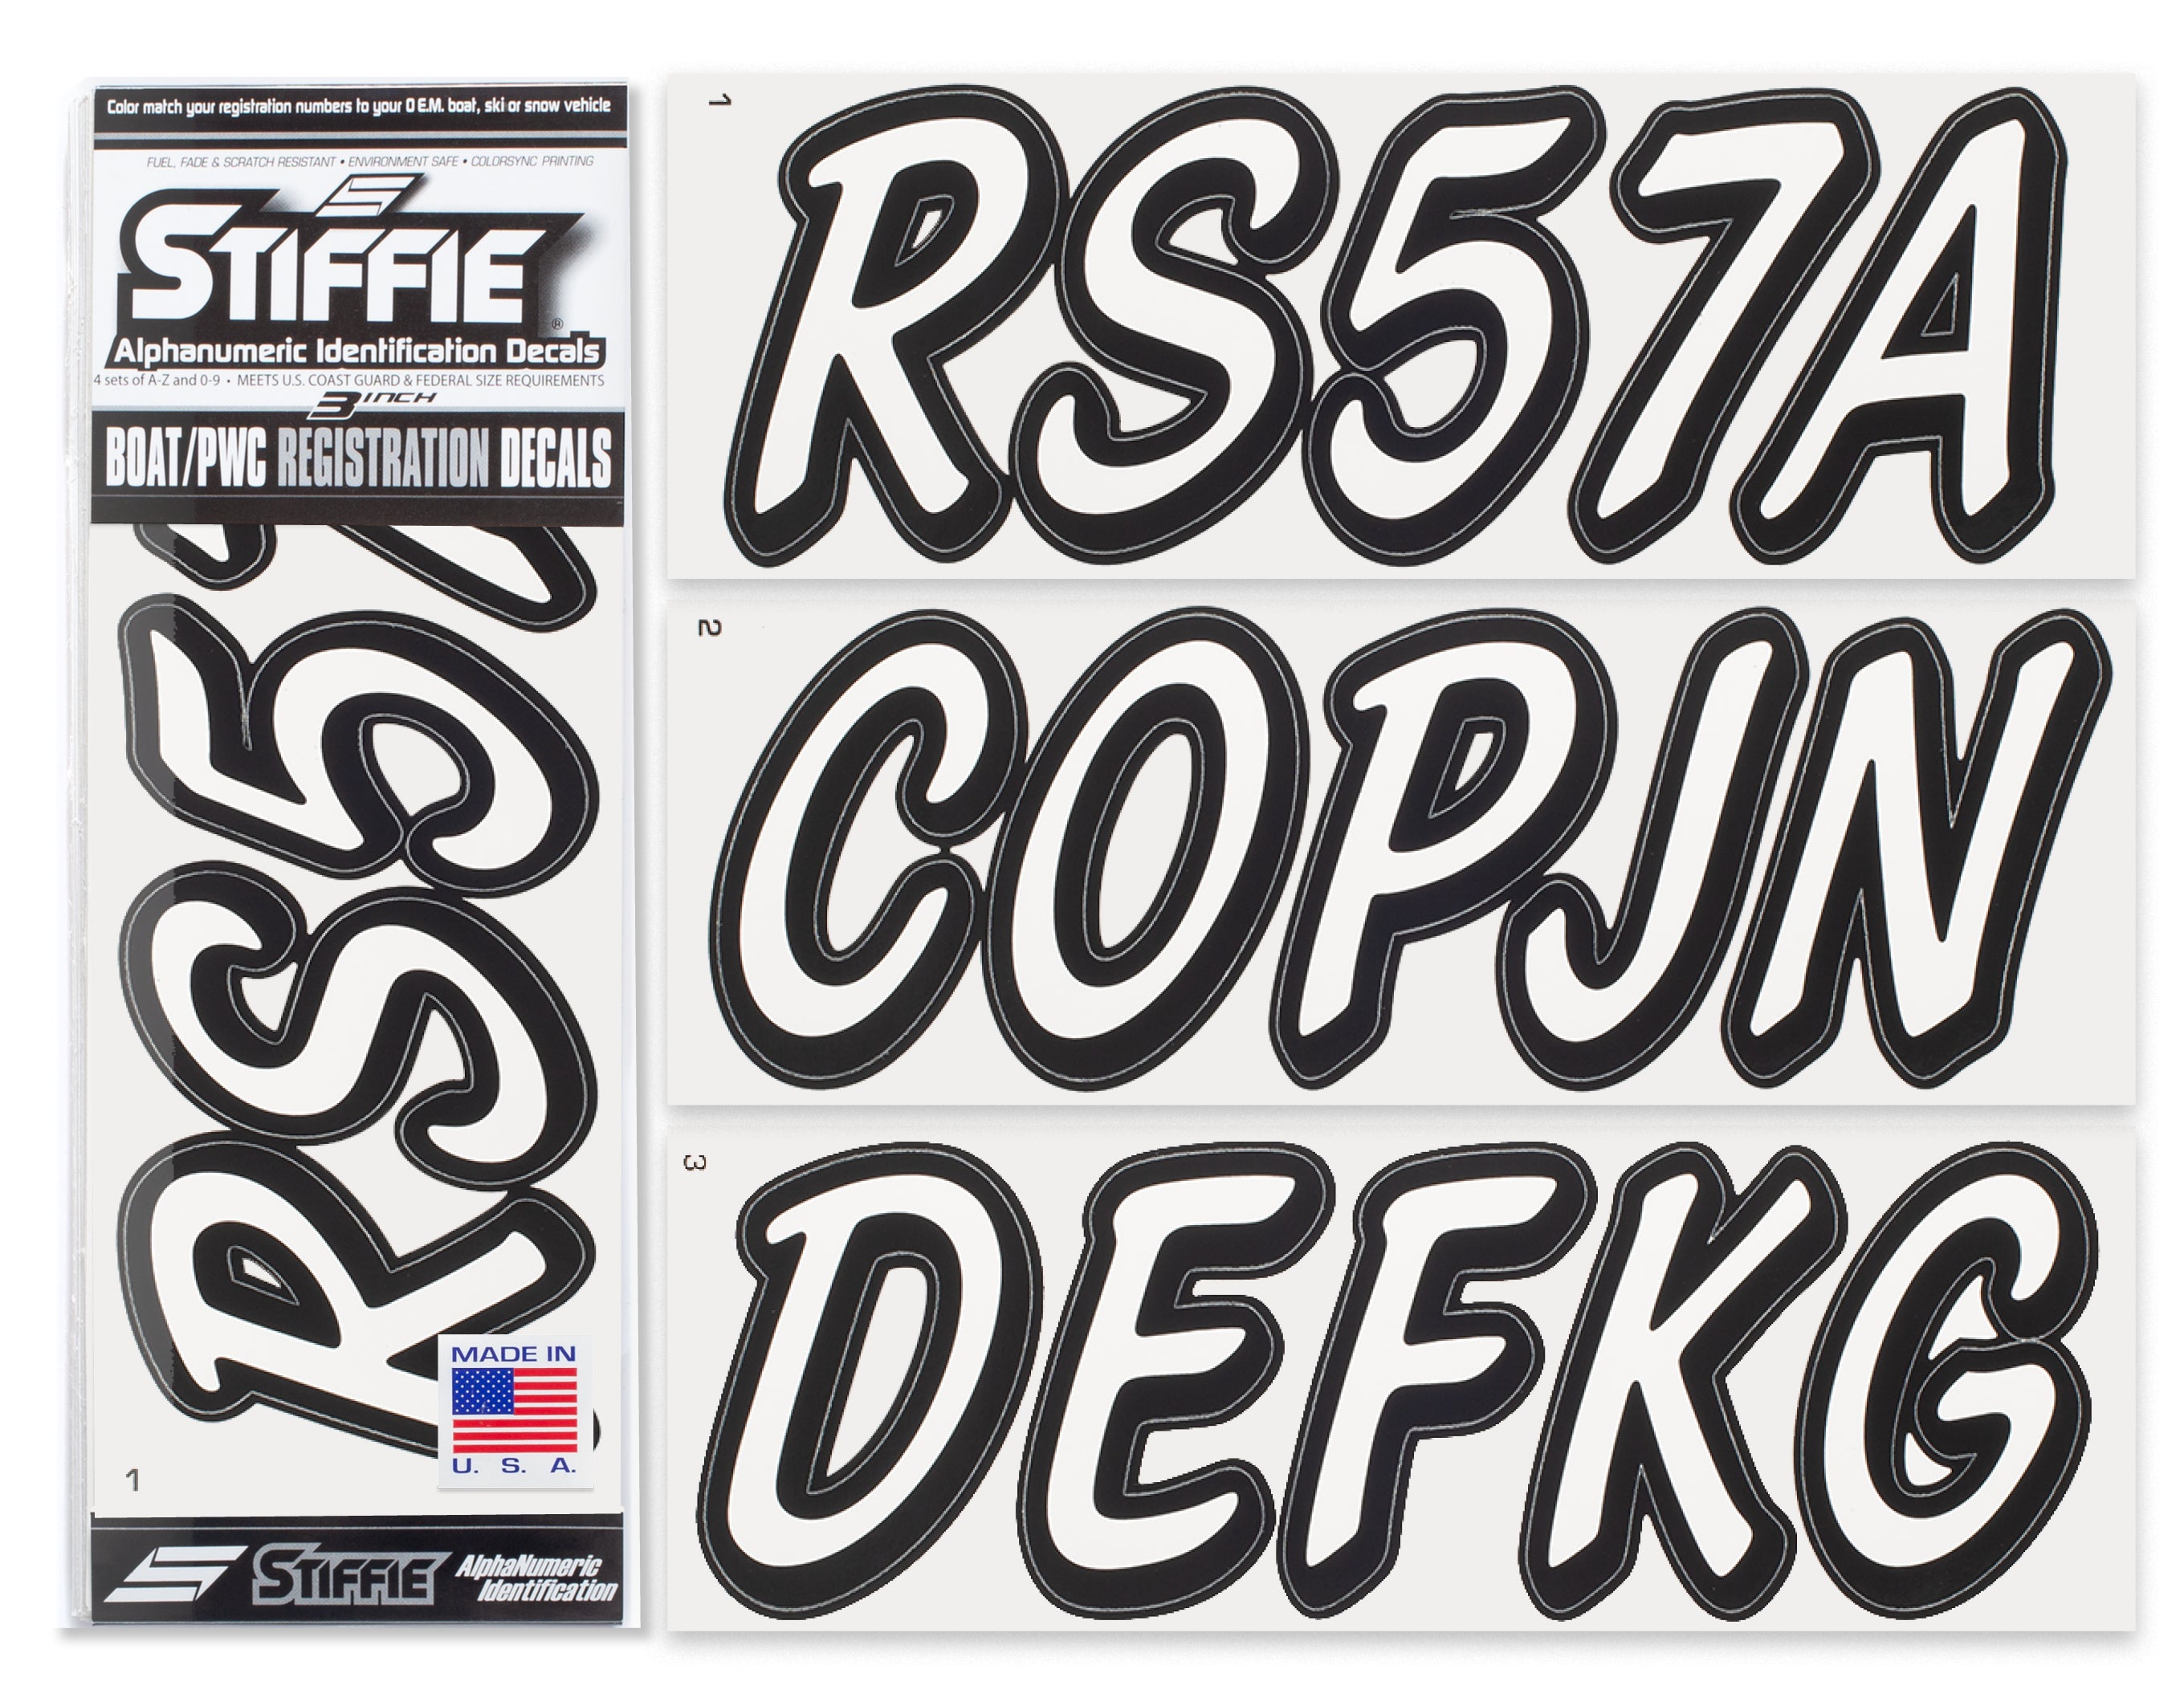 STIFFIE Whipline Solid White/Black 3" Alpha-Numeric Registration Identification Numbers Stickers Decals for Boats & Personal Watercraft